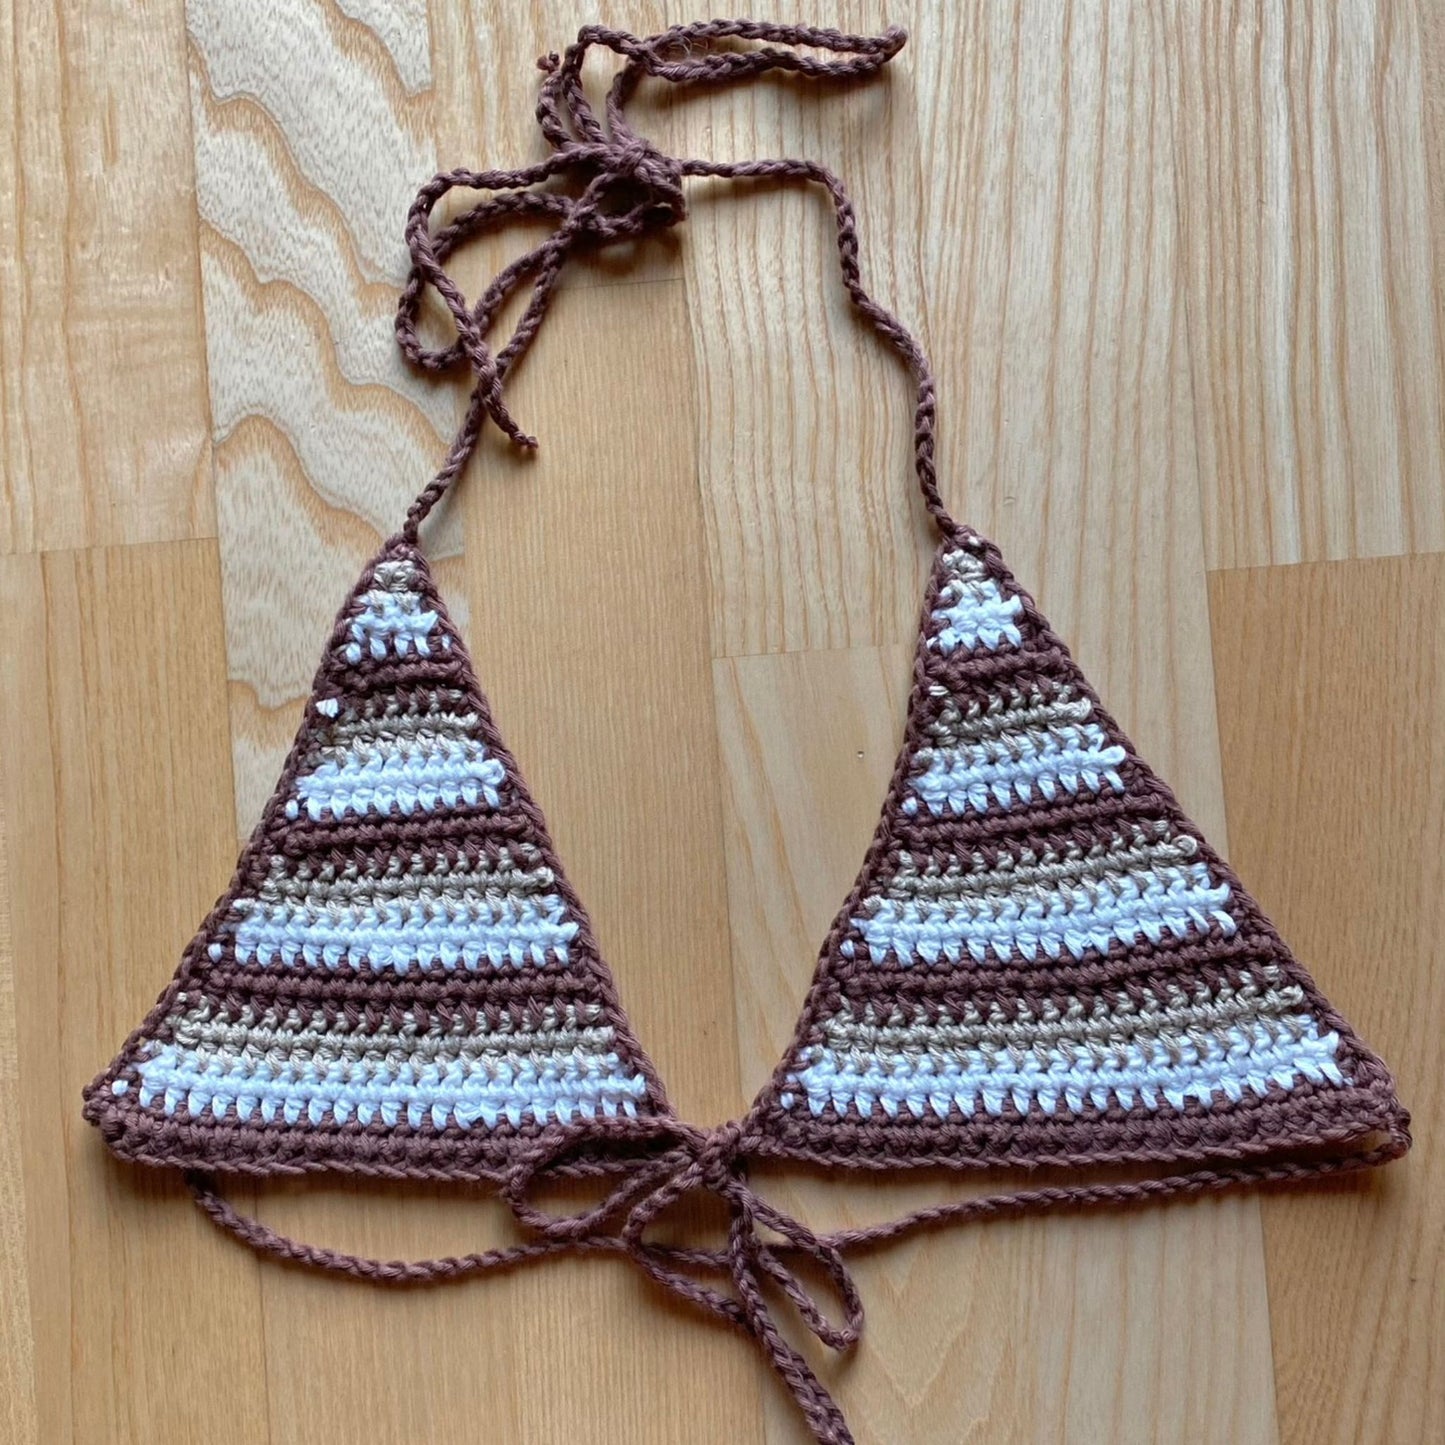 Brown, beige and white striped crochet triangle bikini top that ties around the neck and in the front under the breast